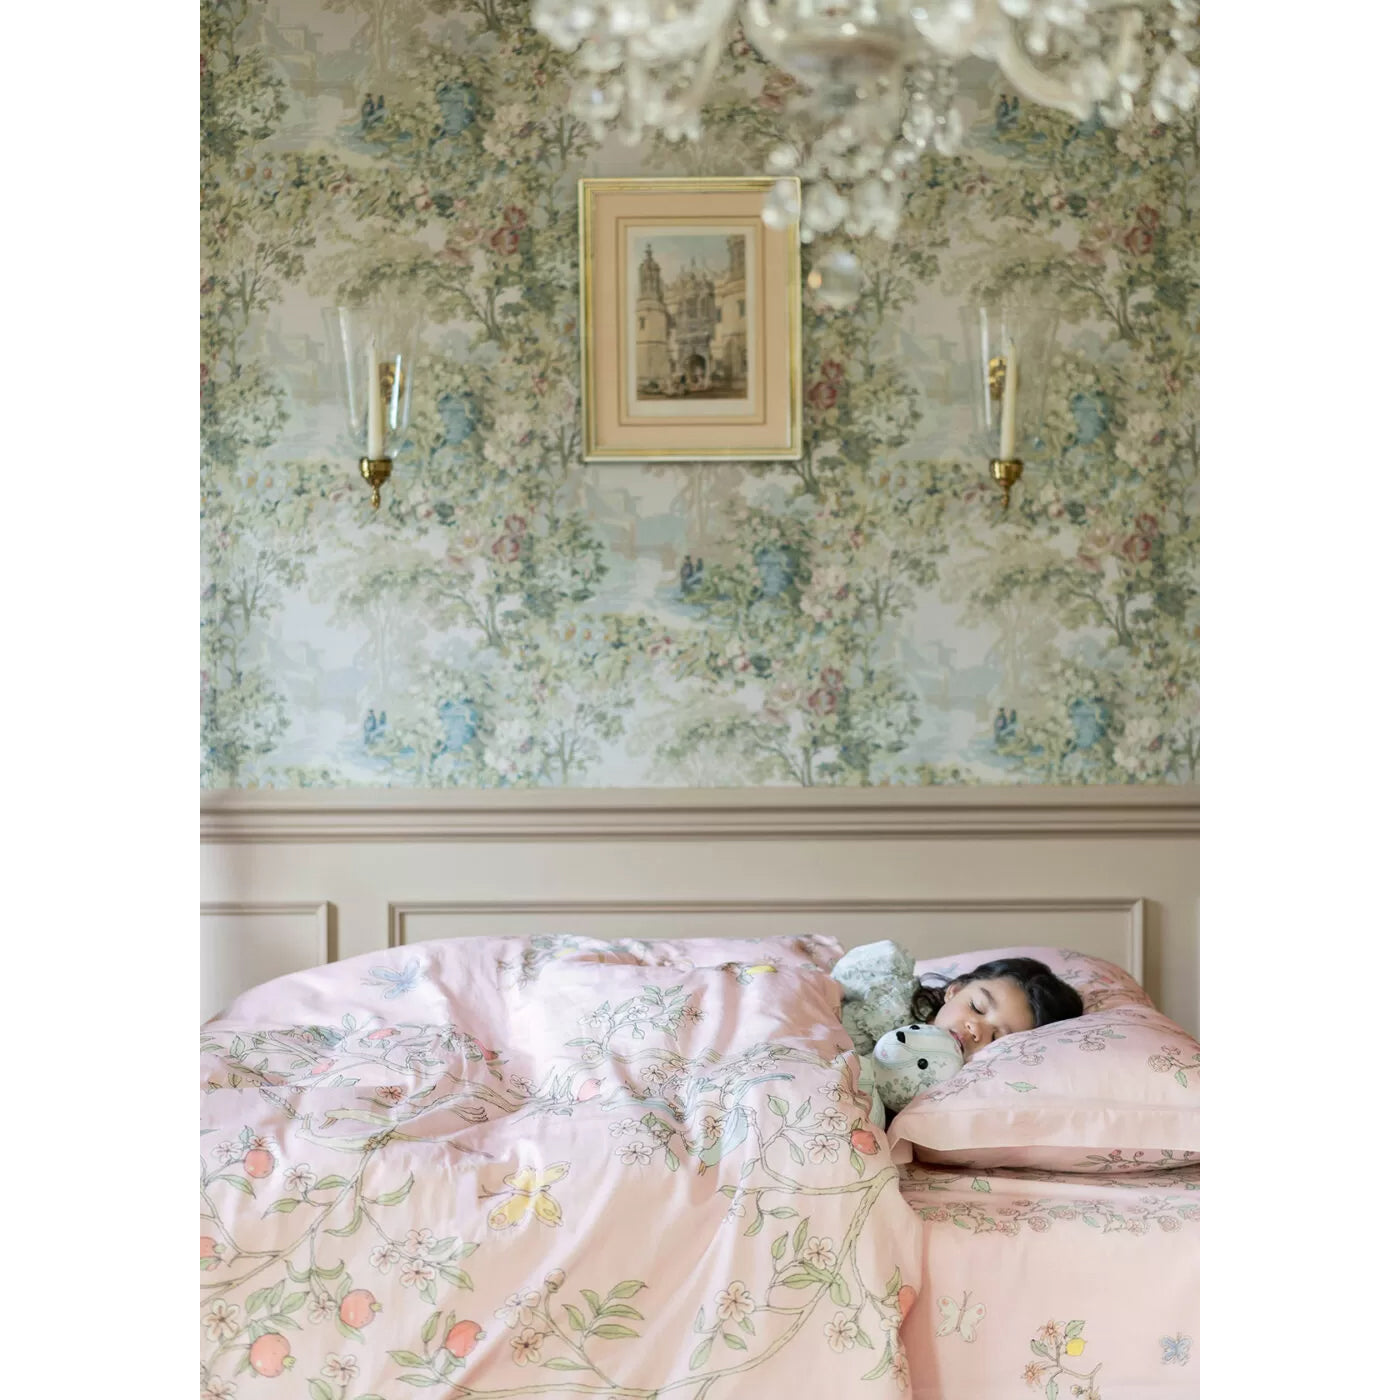 atelier-choux-single-bed-duvet-cover-in-bloom-pink-atel-1171148